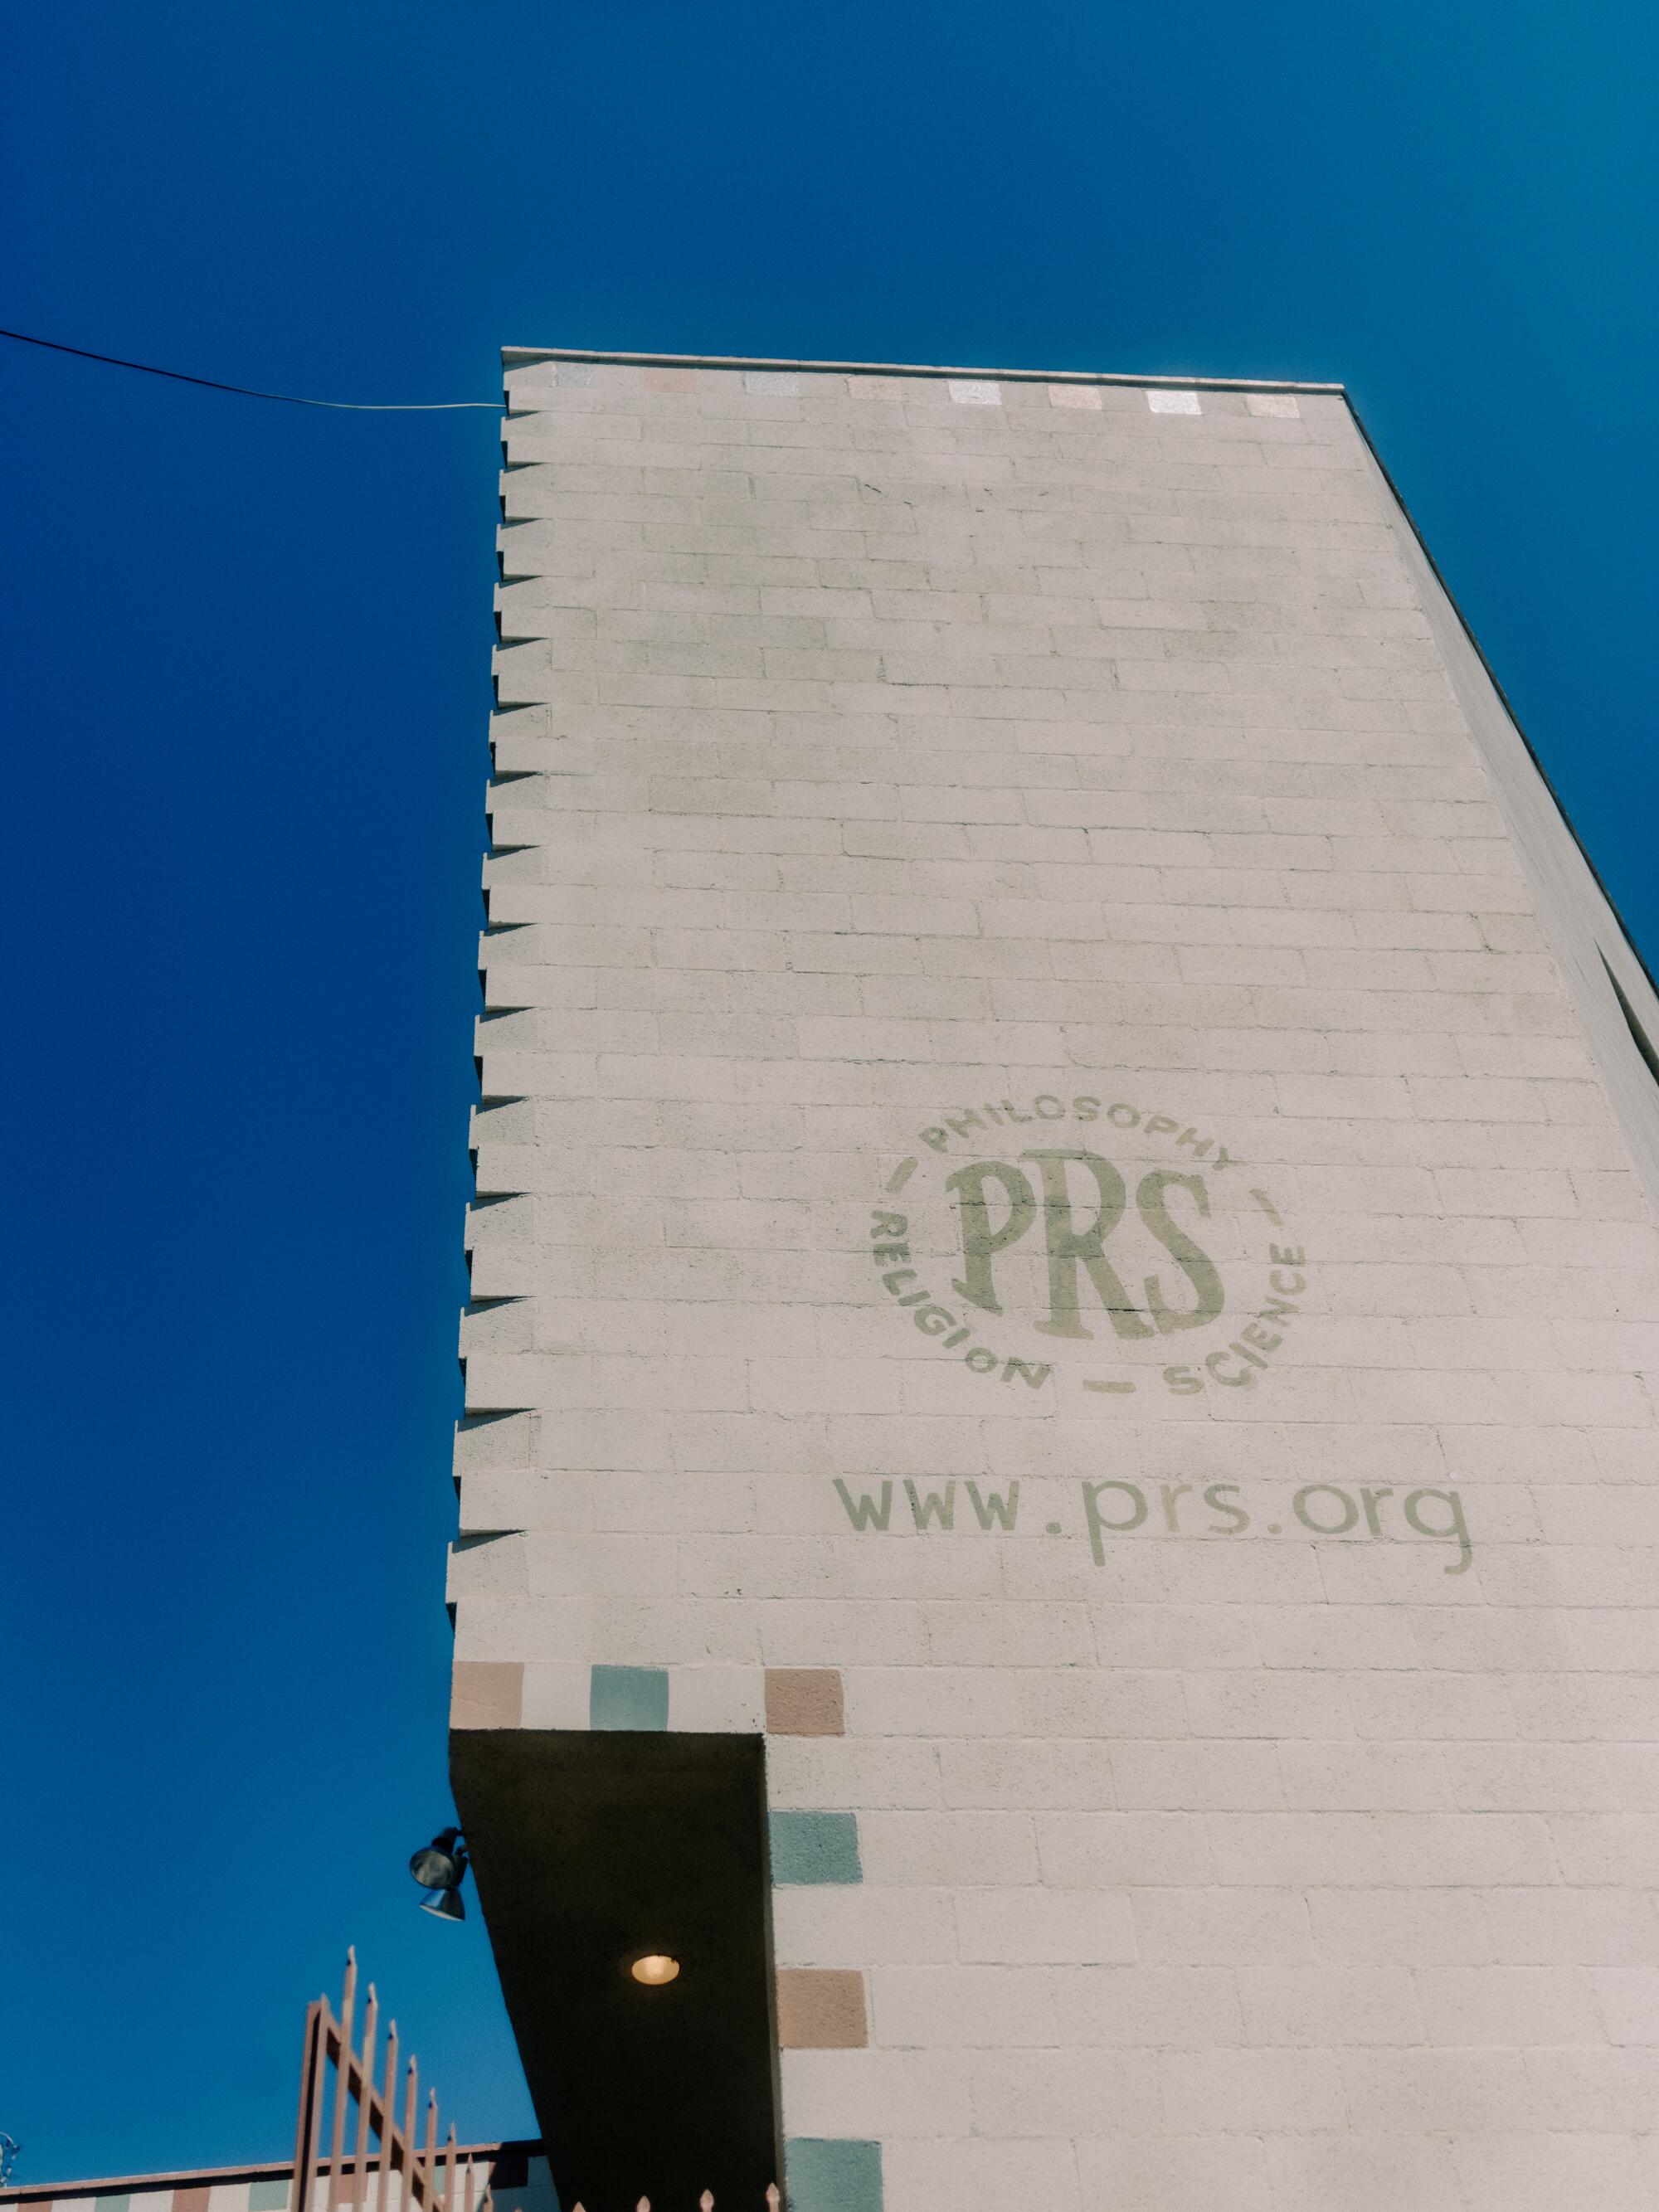 An exterior wall of the Philosophical Research Society reads "PRS" and "www.prs.org"